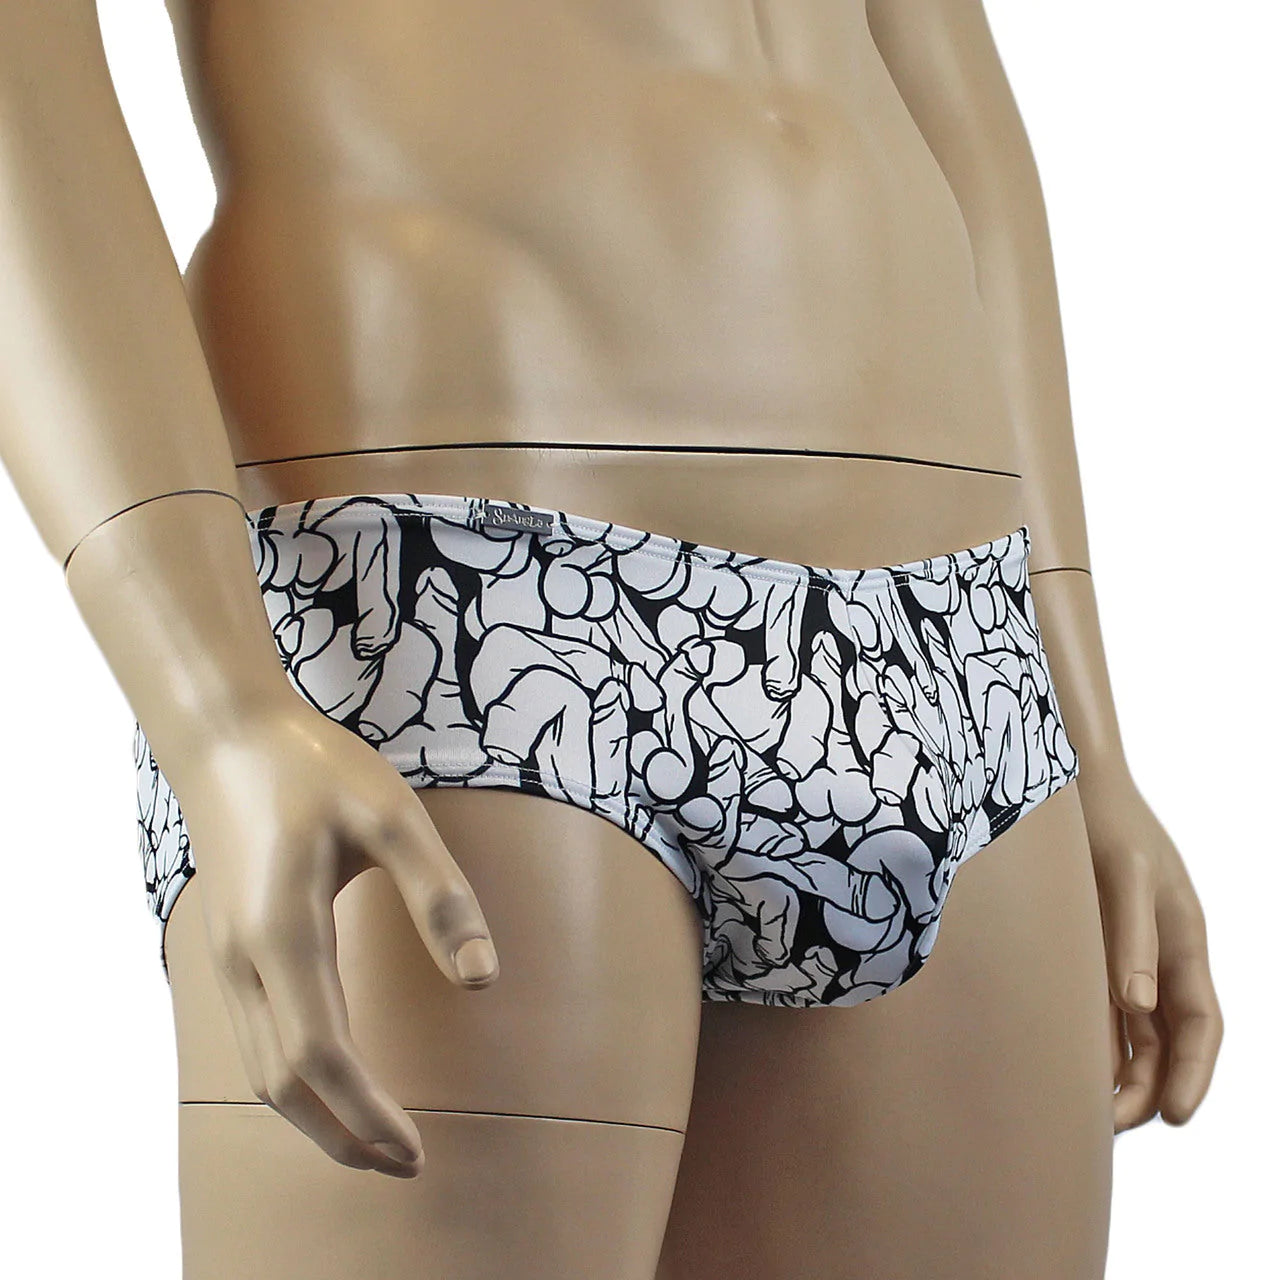 SALE - Male Willie Boxer Brief with Naughty Print Black and White